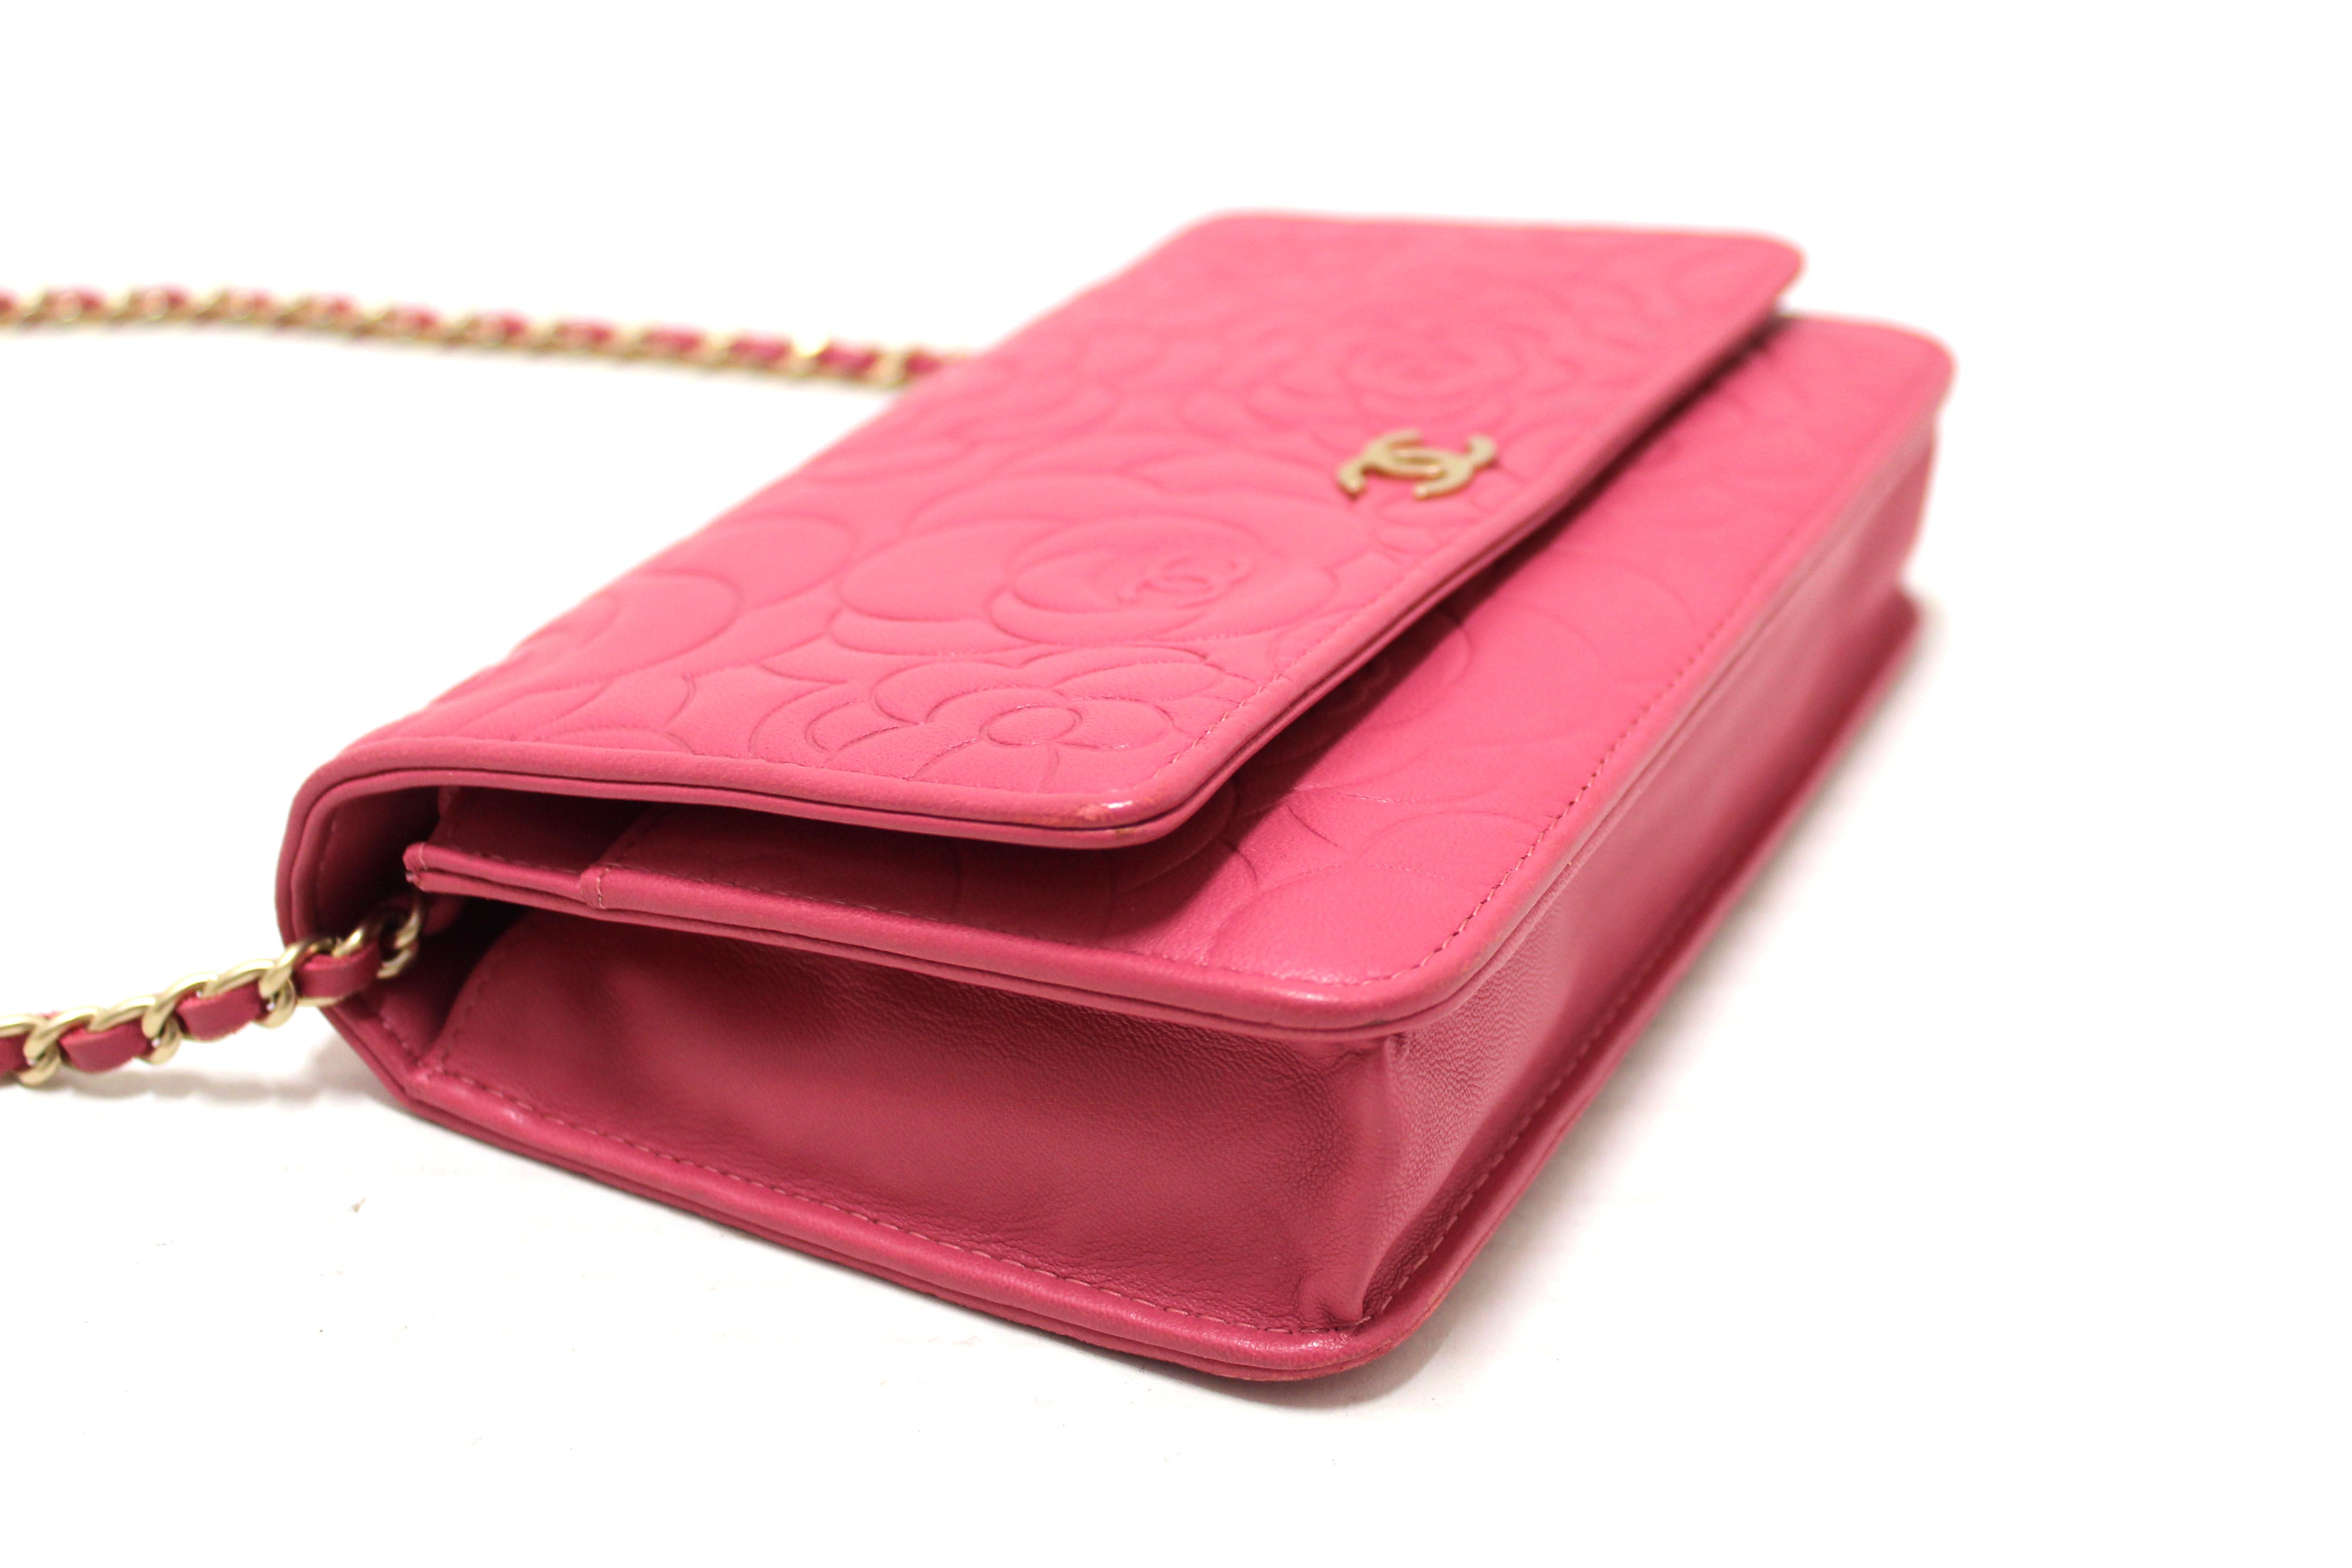 Authentic Chanel Pink Camellia Lambskin Leather Wallet On Chain/Clutch Bag